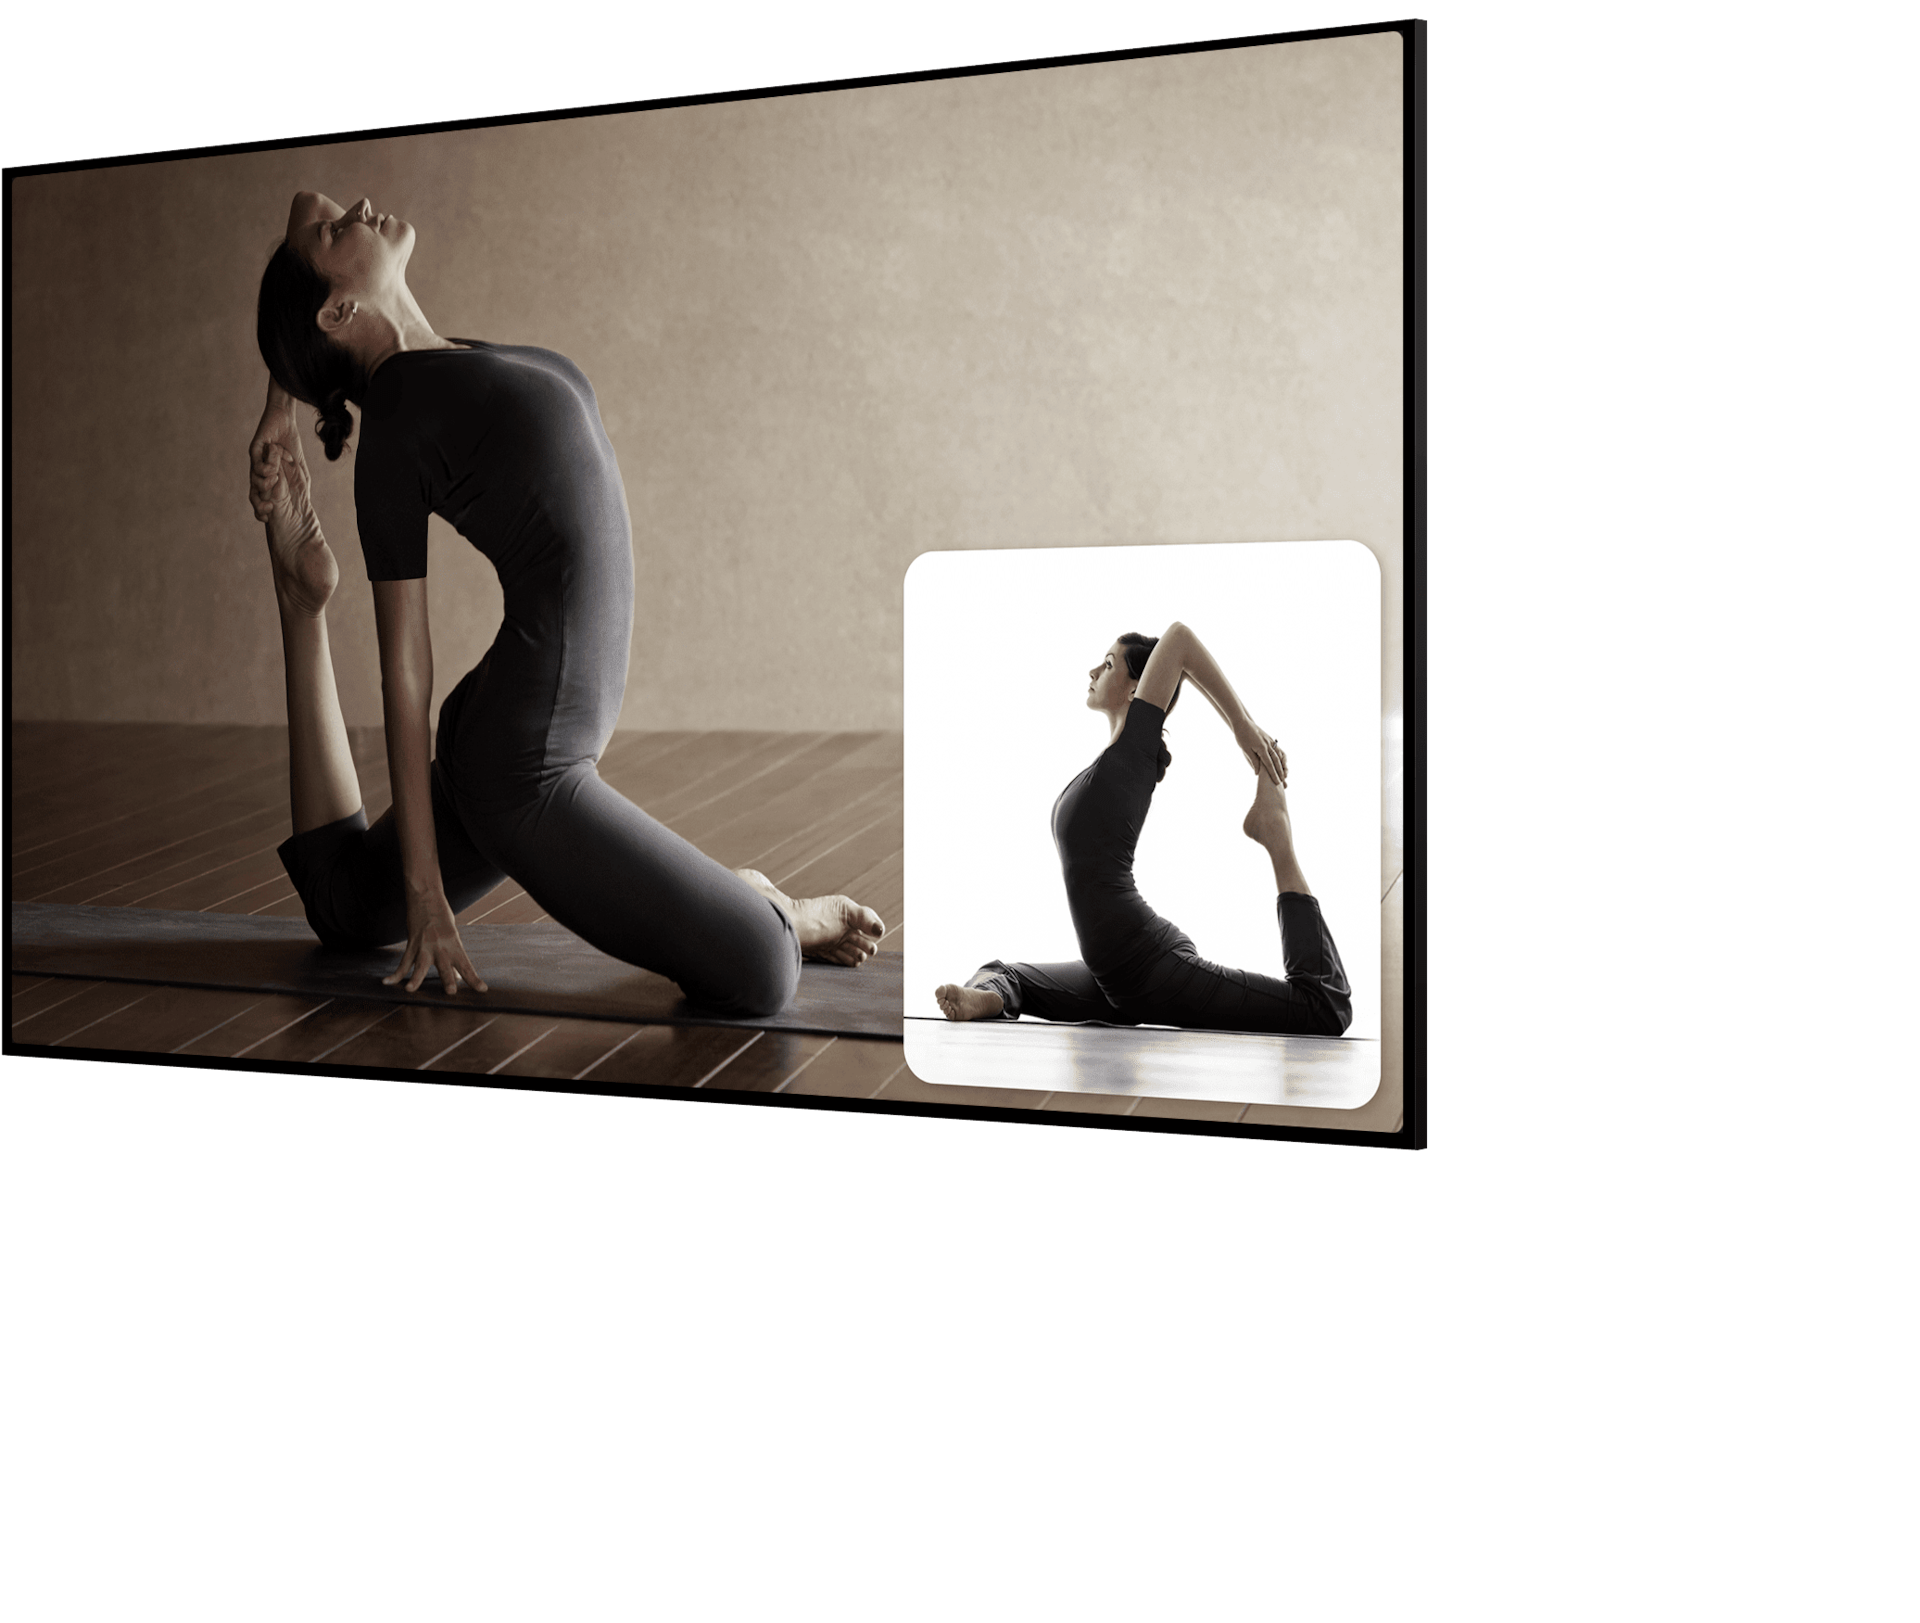 TV showing a video with female instructor in a backbend yoga position onscreen. A small square in the corner mirrors the phone's camera as a woman follows along.